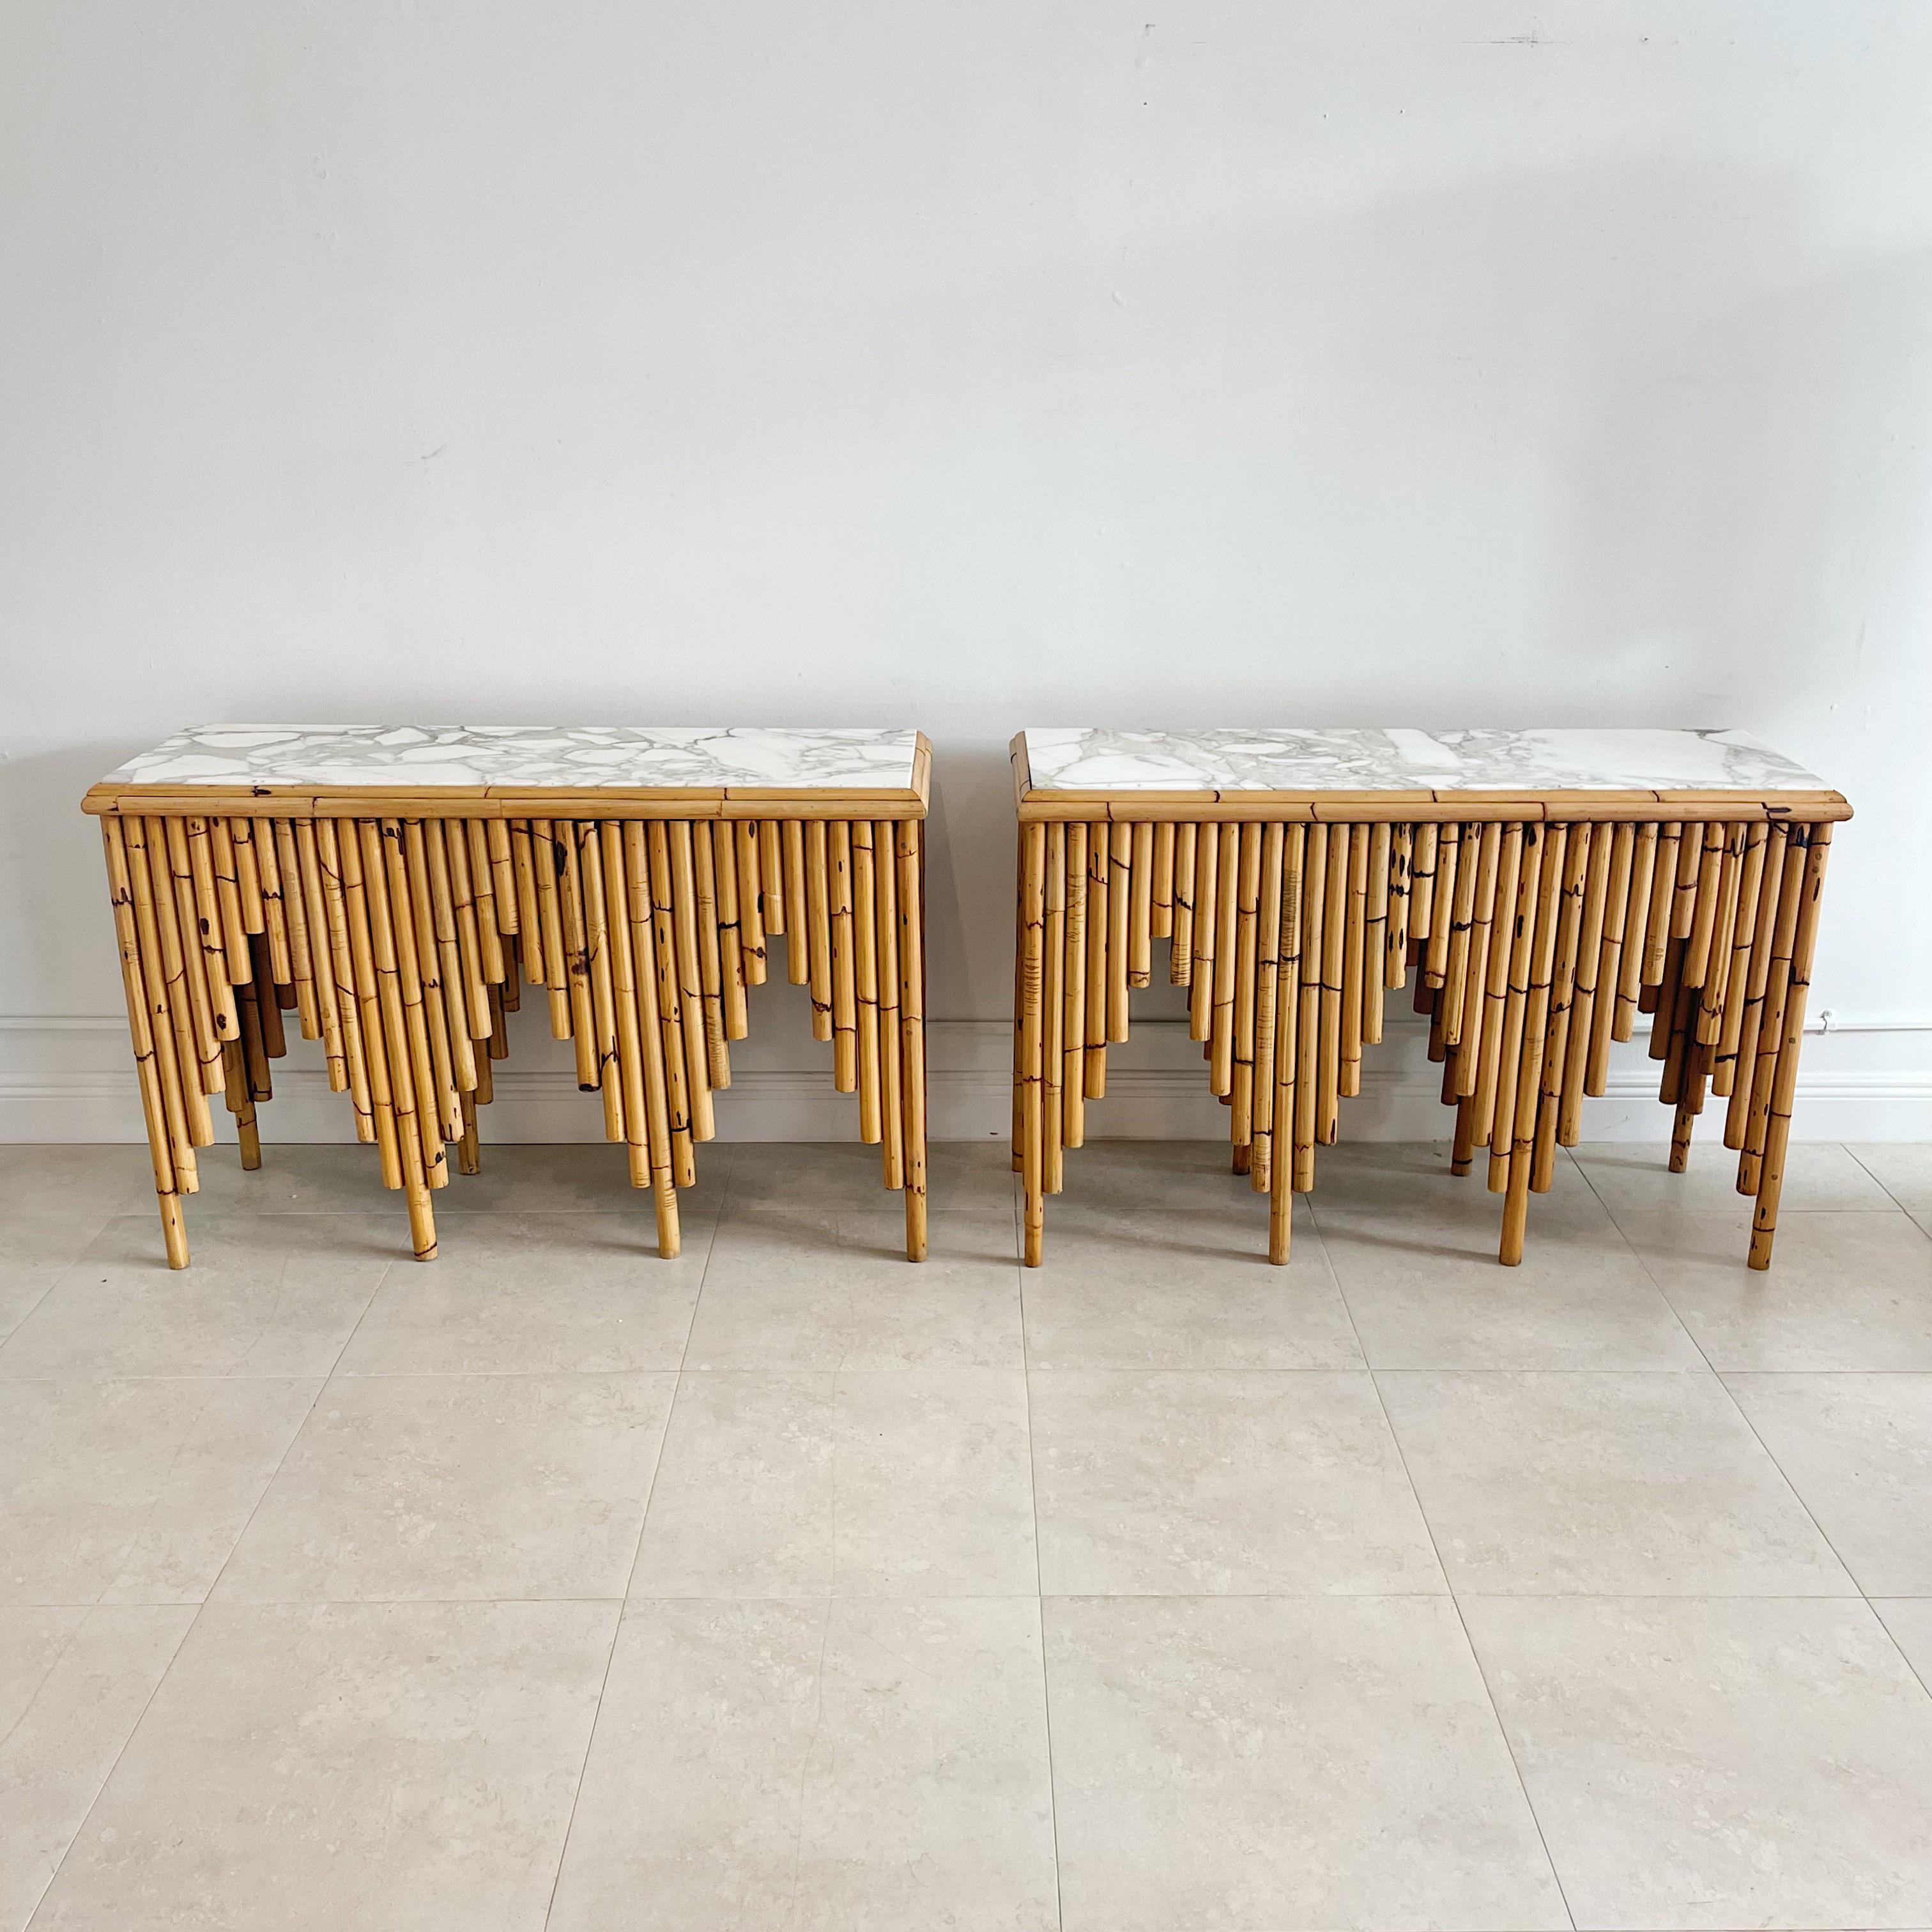 Rare and Important Pair of Henry Olko Bamboo & Marble 'Calliope' Console Tables 1